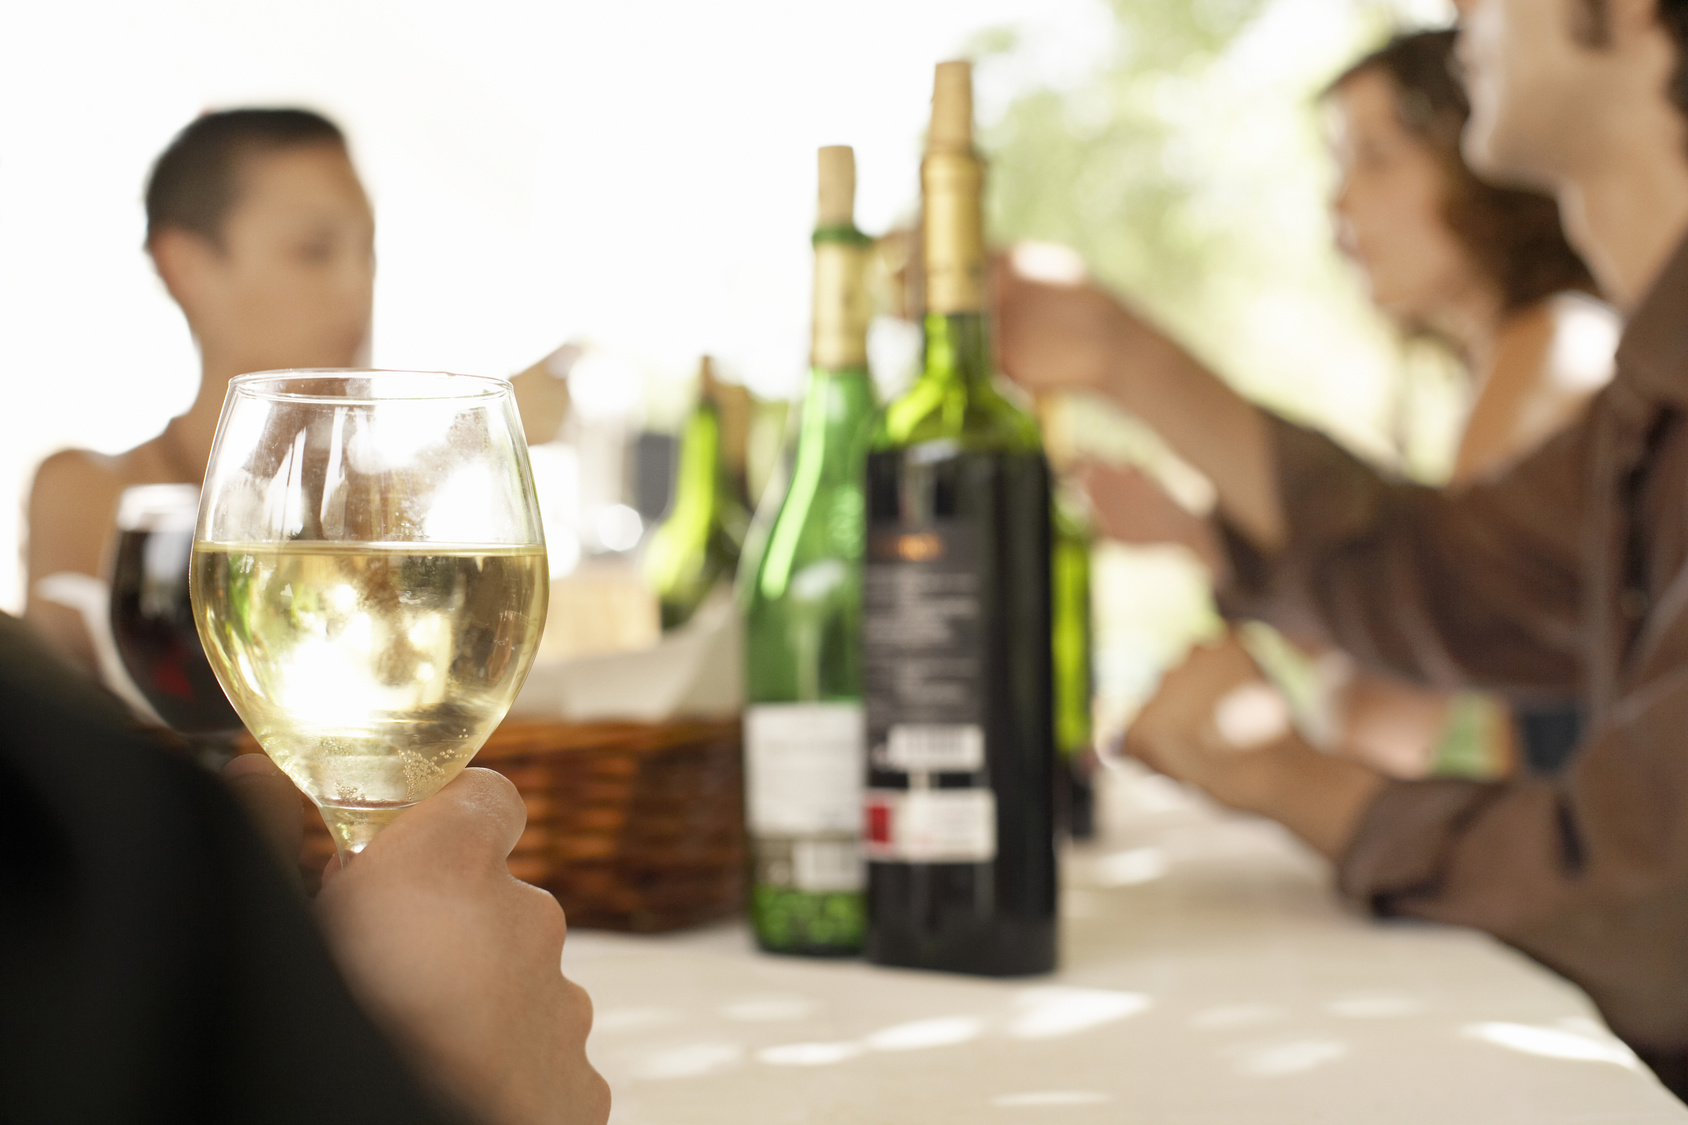 Glass of white wine on table surrounded by people at party